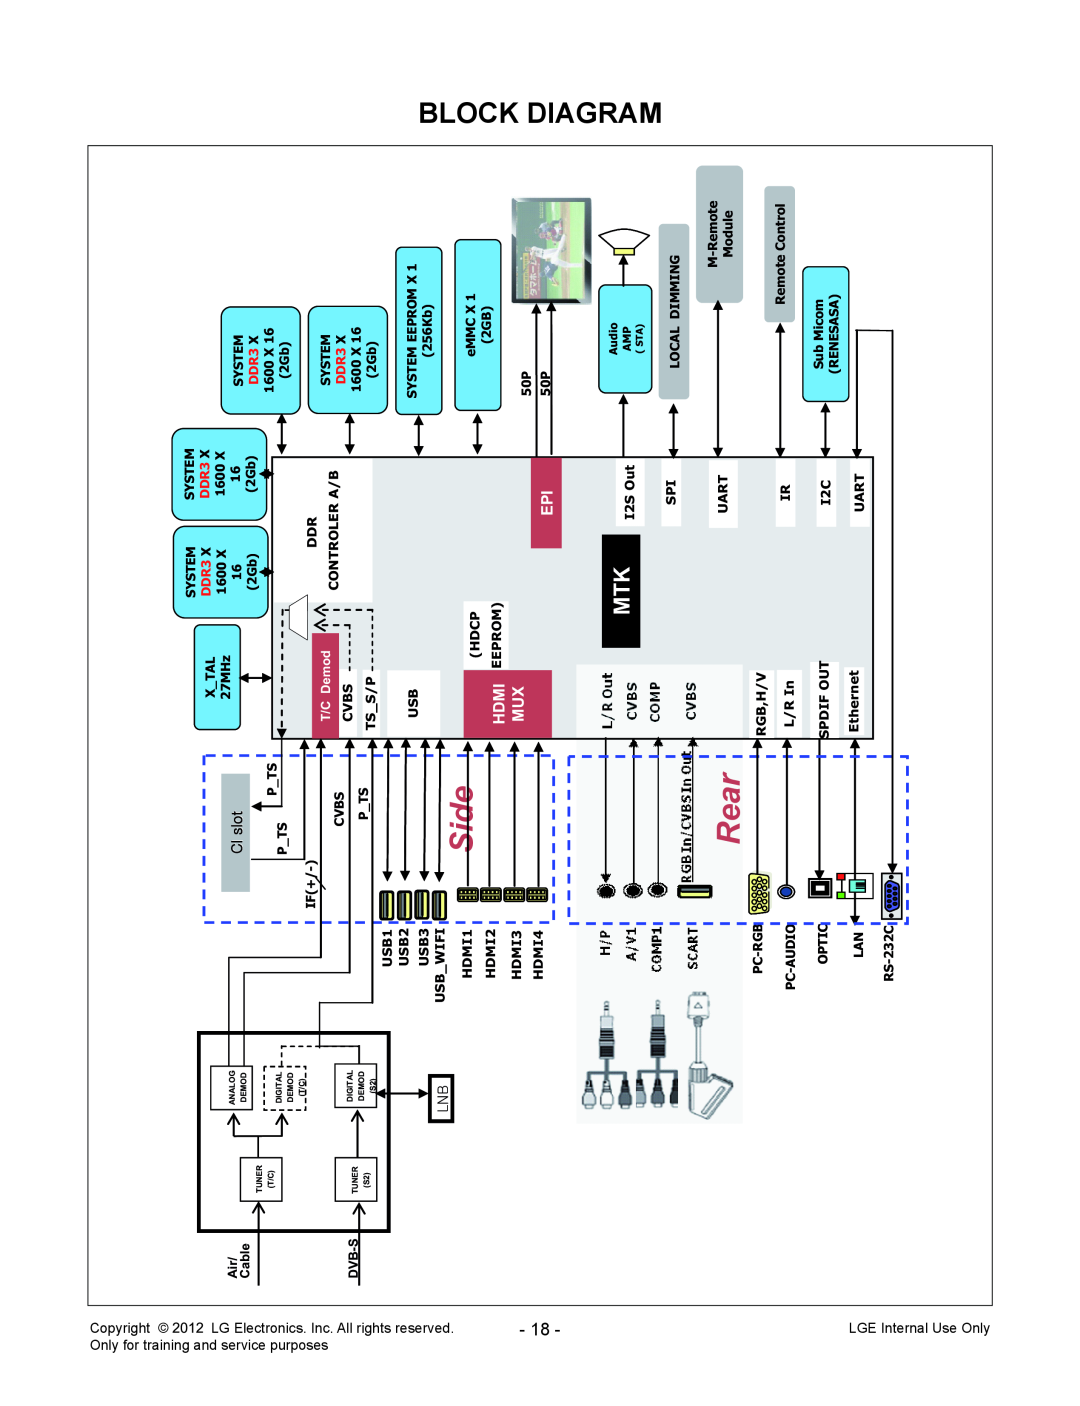 LG Electronics 32LM640S/640T-ZA Block Diagram, Side, Rear, Hdmi, Copyright, All rights reserved, LGE Internal Use Only 